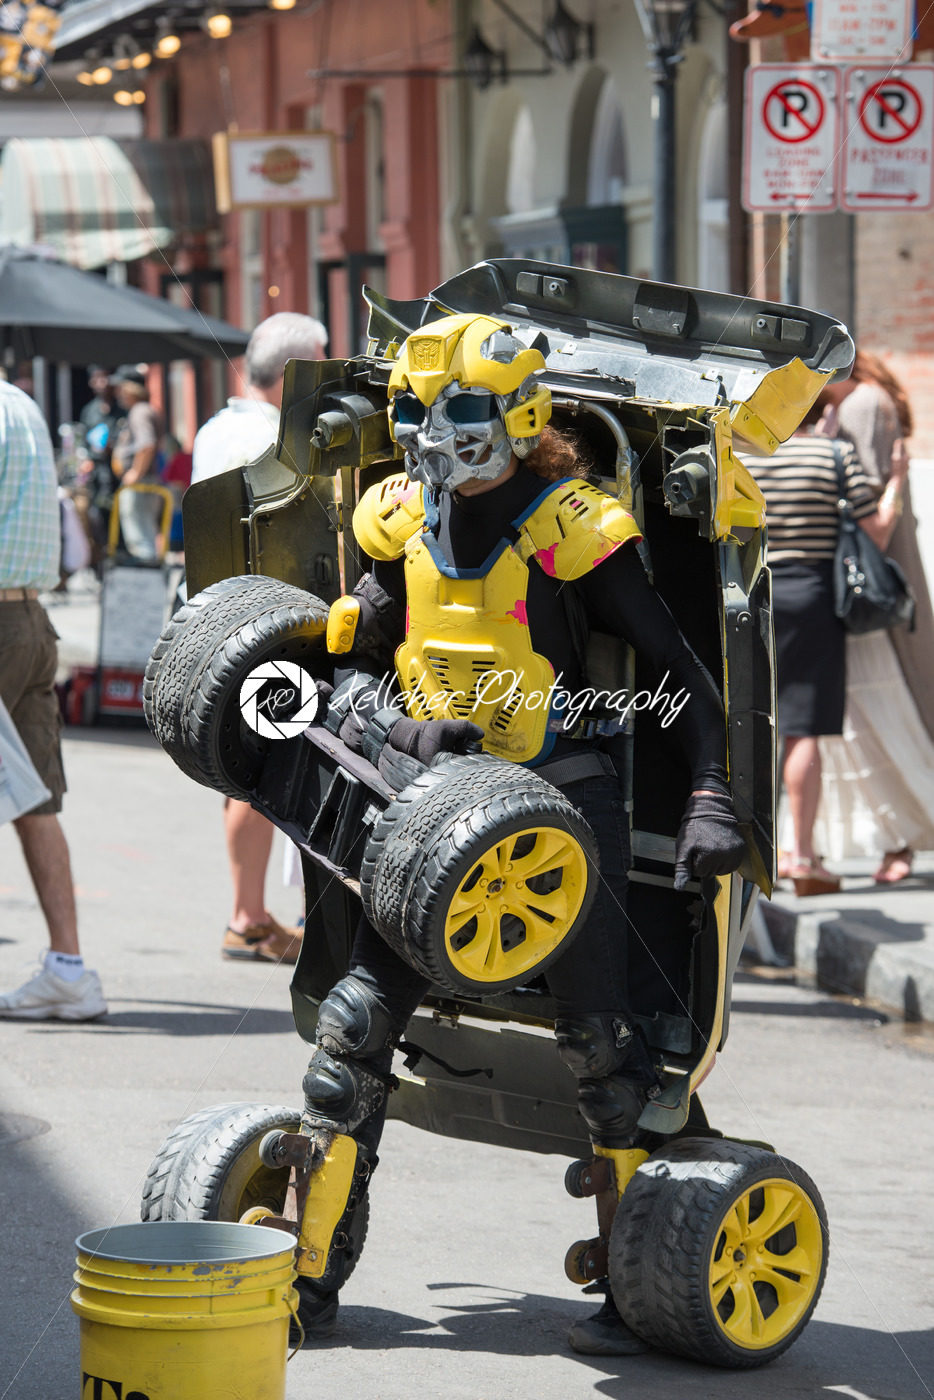 NEW ORLEANS, LA – APRIL 13: Street performer in New Orleans, man transforms between car and robot on April 13, 2014 - Kelleher Photography Store